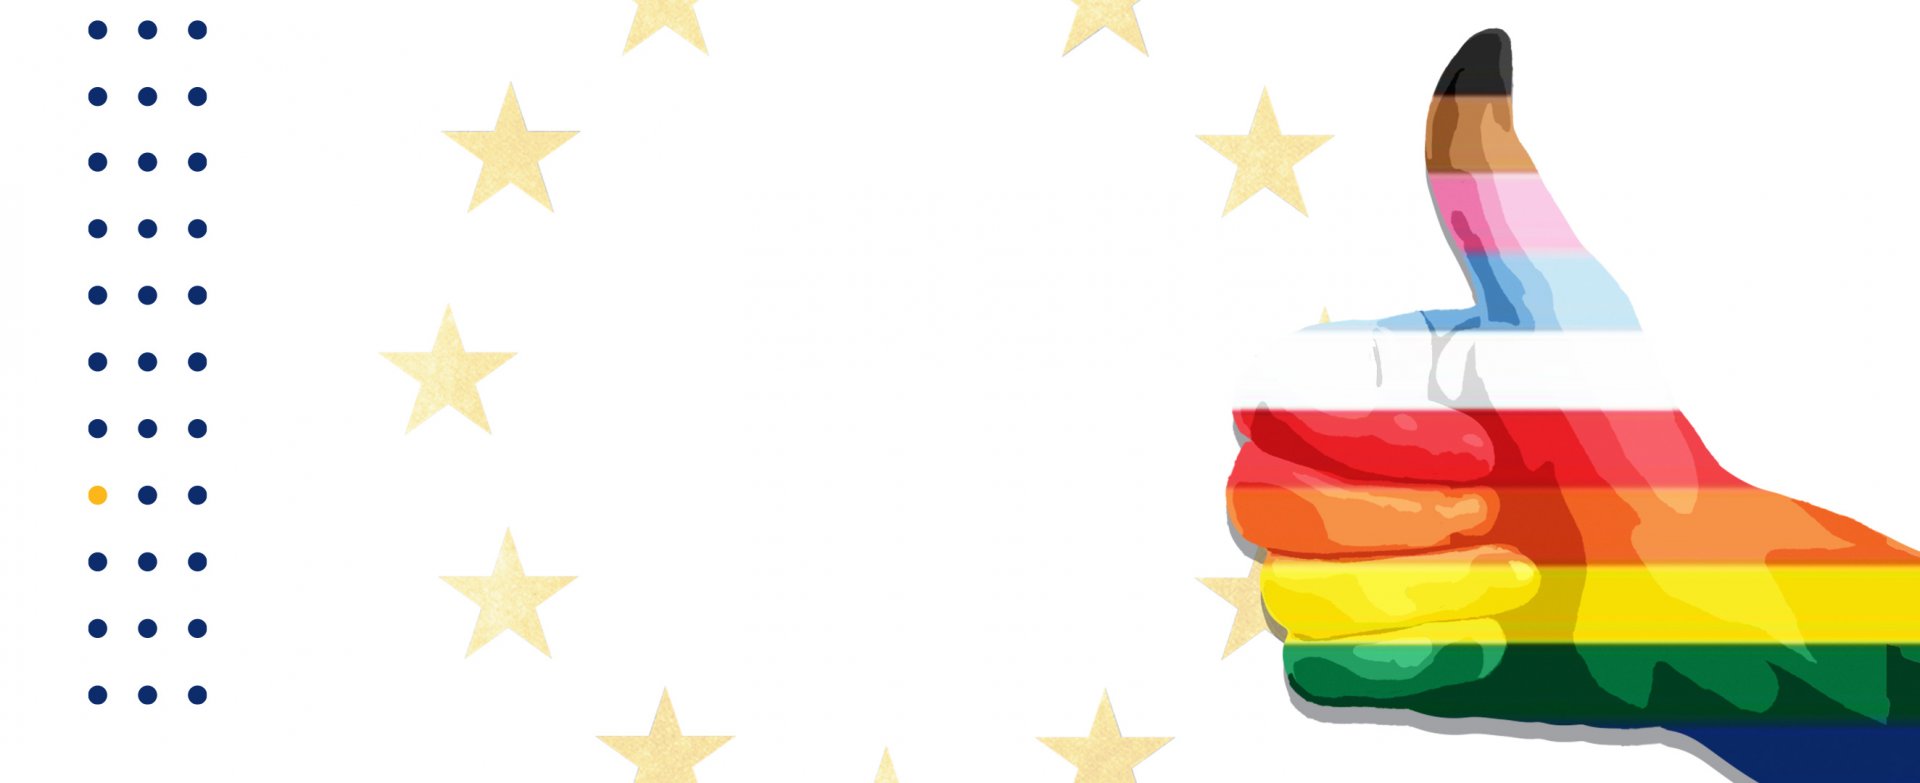 European Commission LGBTI equality strategy and the role of member states